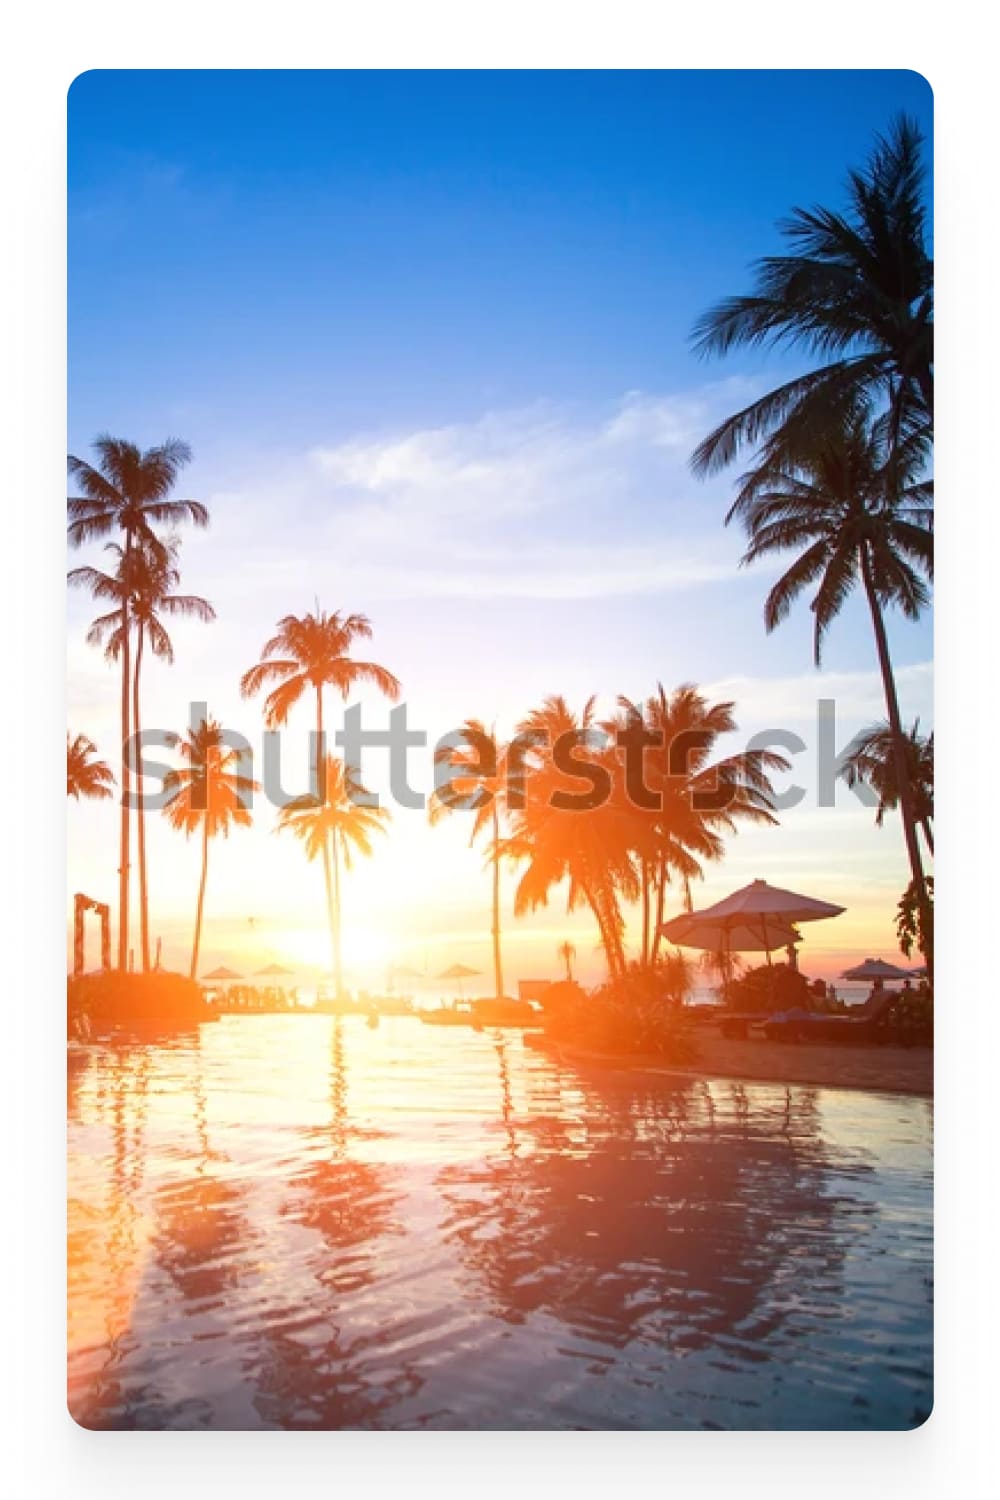 Photo of a swimming pool with palm trees and frontlight.